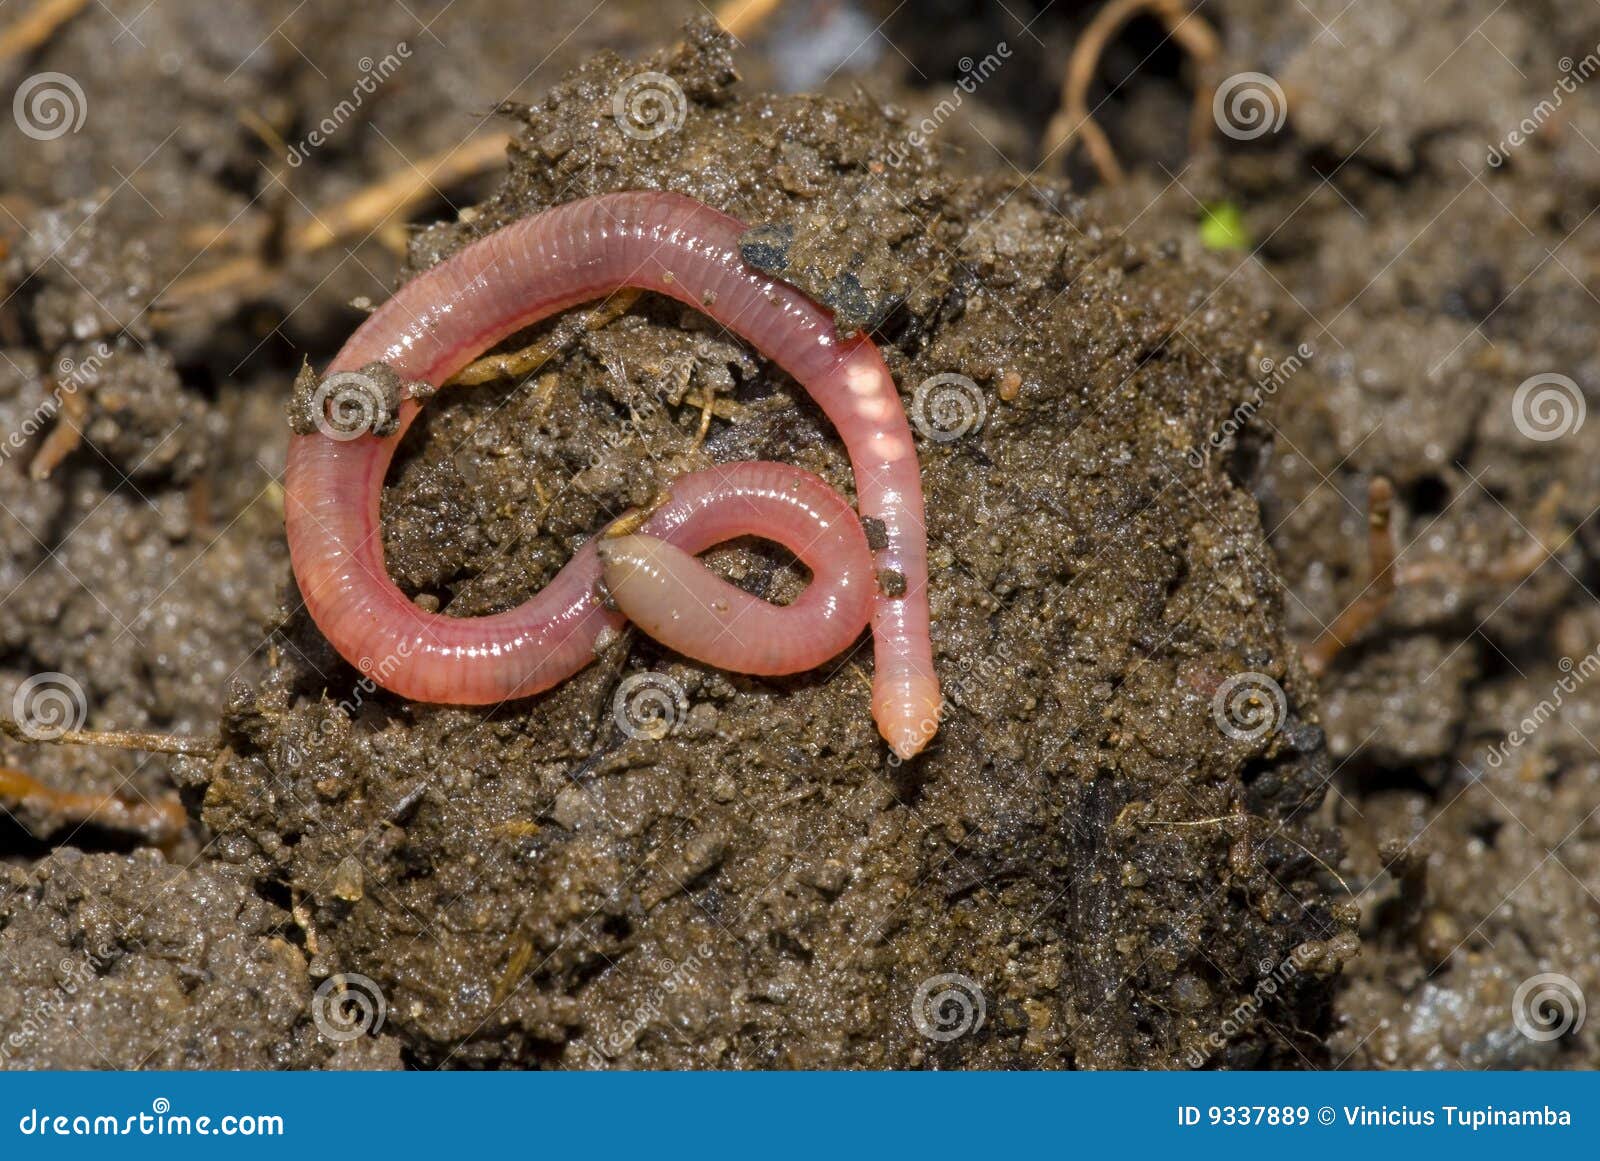 EarthWorm stock image. Image of pink, life, insect, brown - 9337889